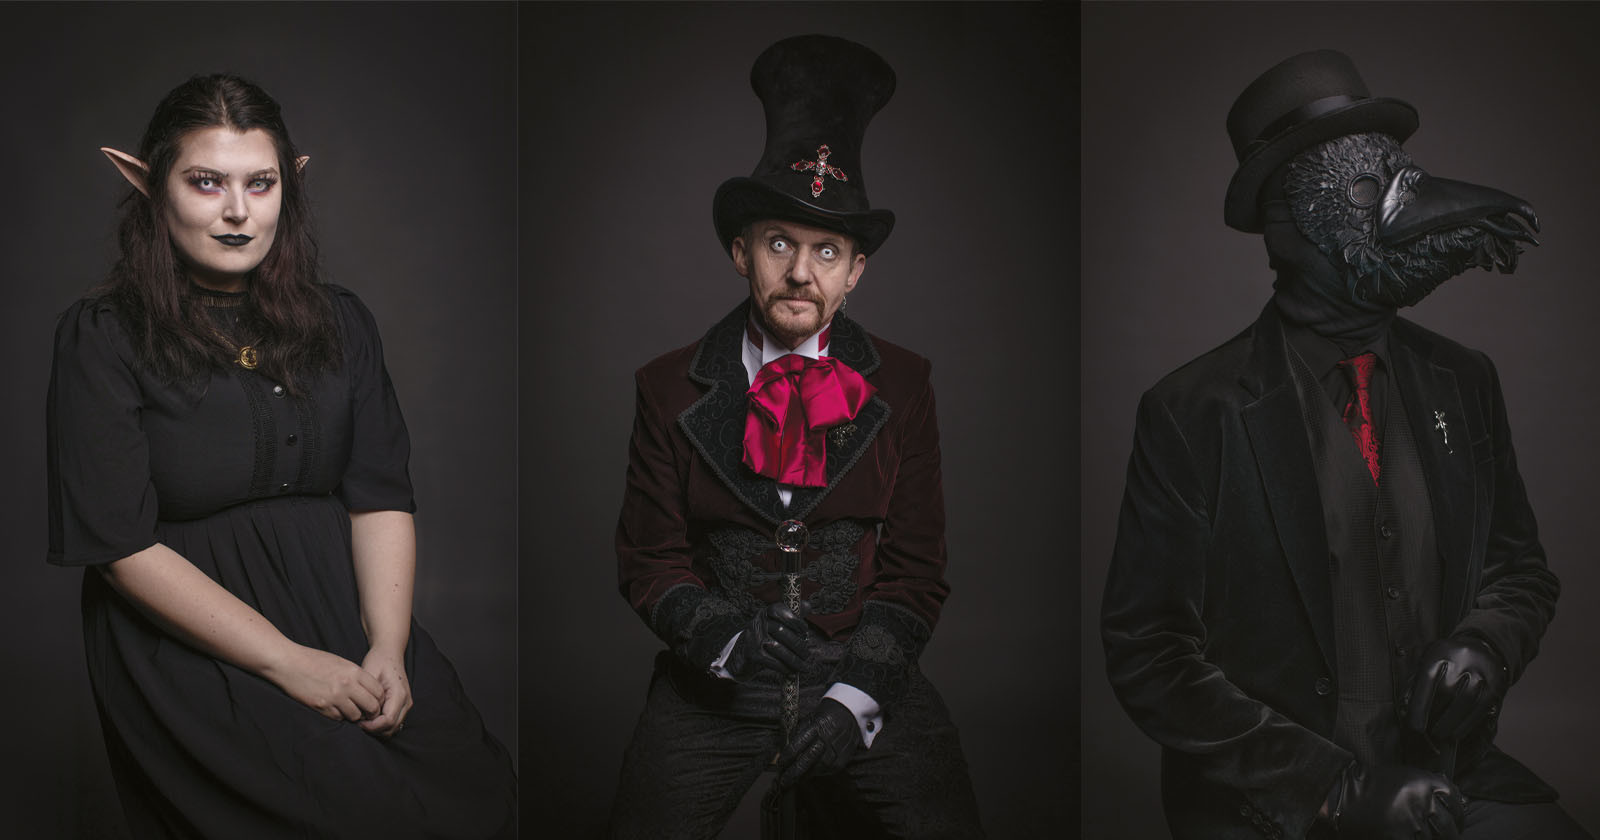  photographer captures spooky portraits annual goth weekend 